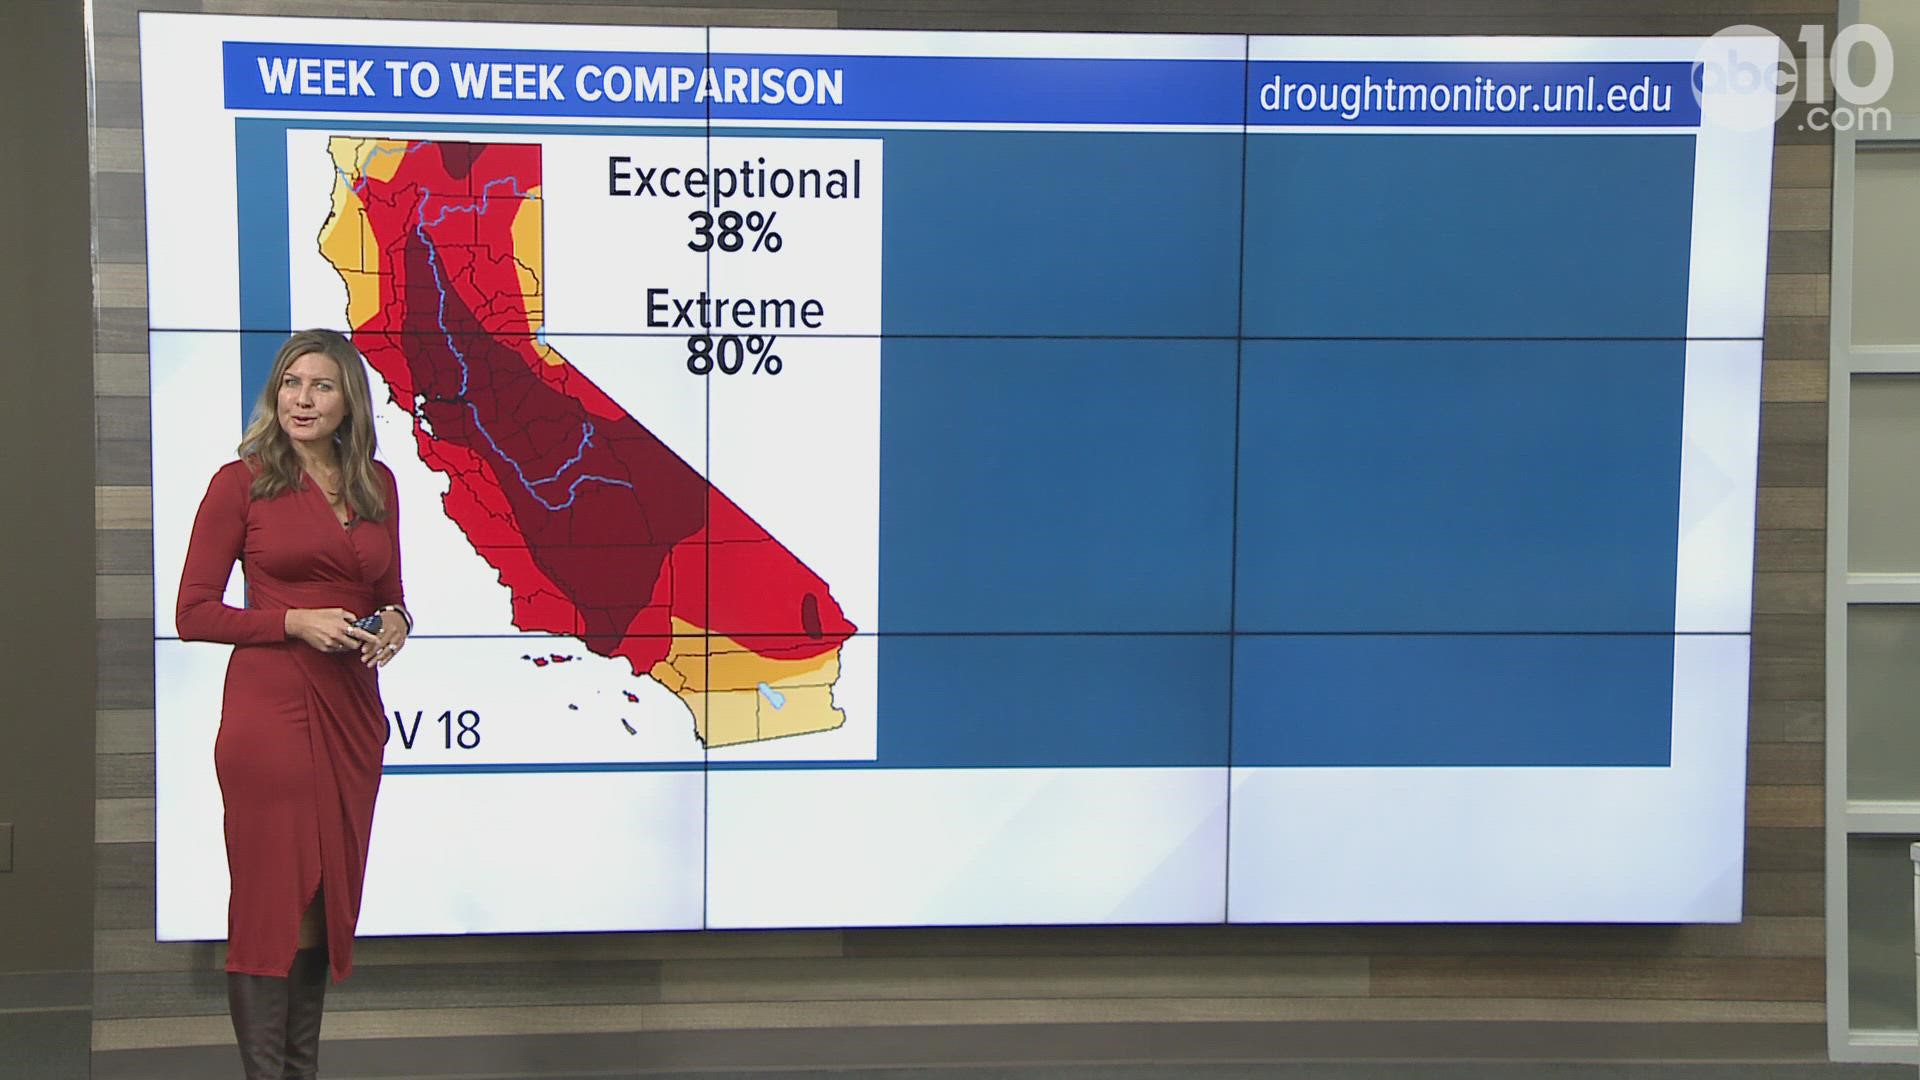 Our Monica Woods takes a look at the ABC10 Drought Monitor for Thanksgiving this year.